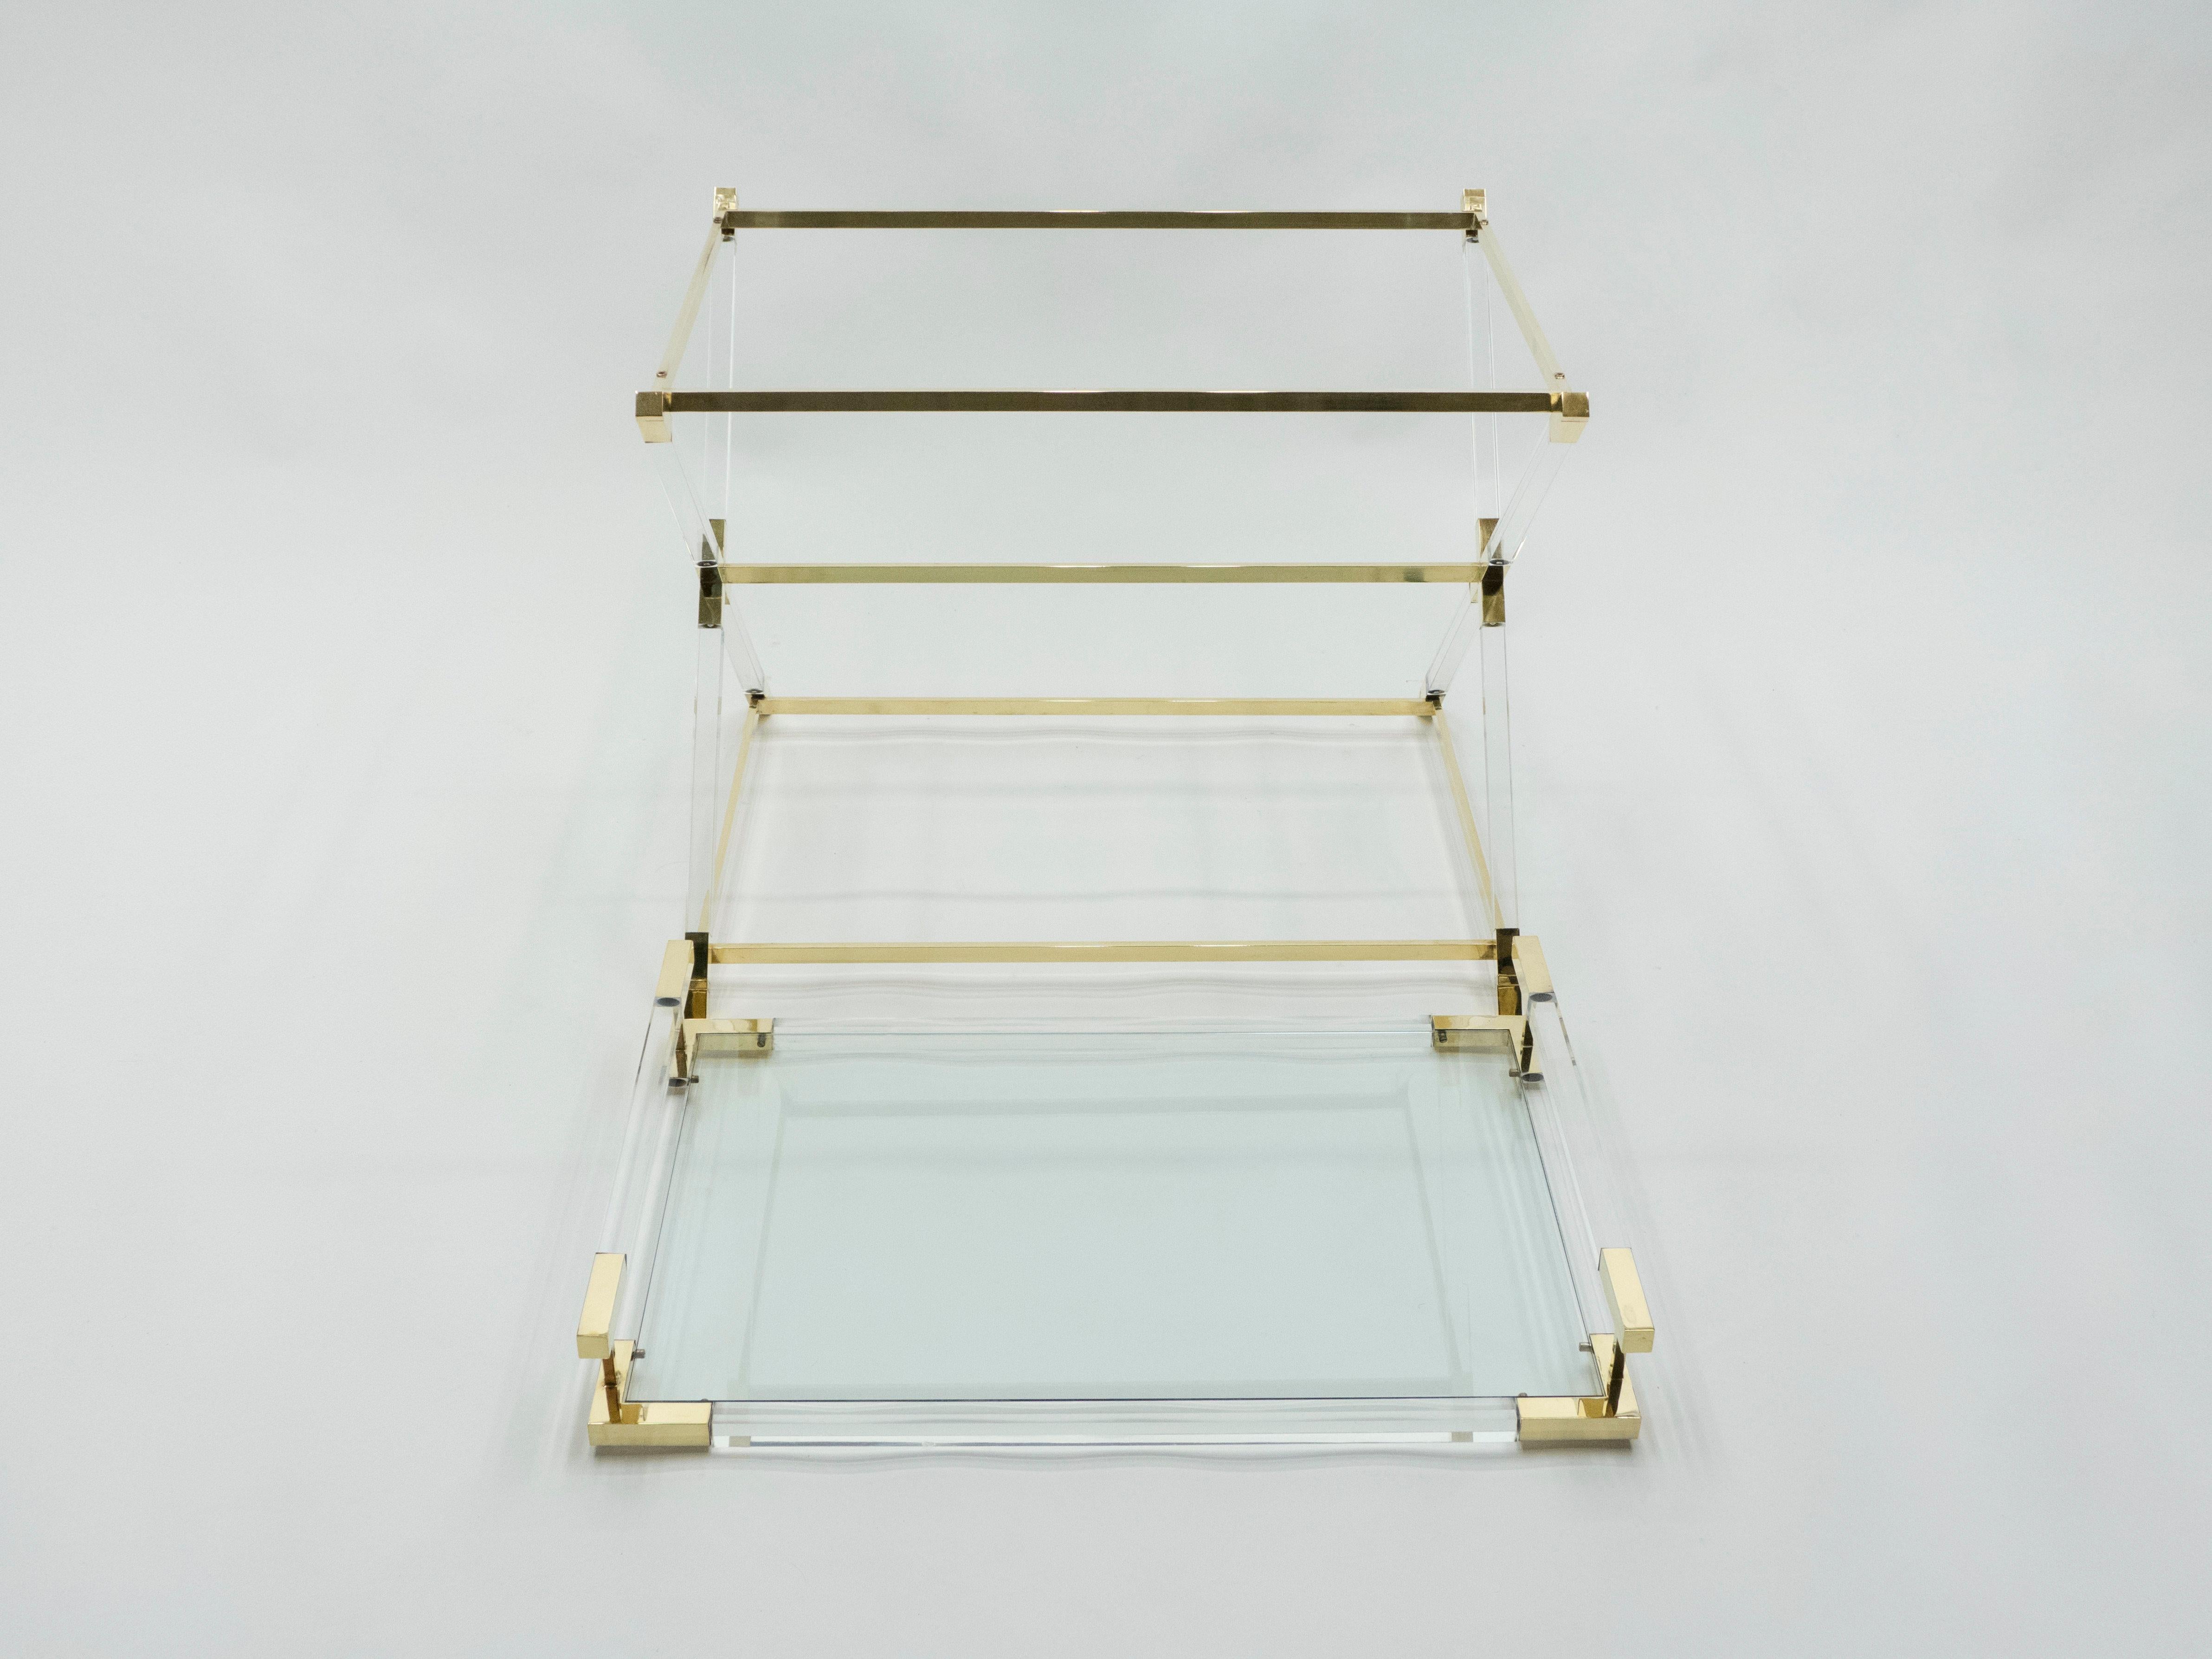 Rare French Side Tray Table Lucite and Brass Maison Jansen, 1970s For Sale 5